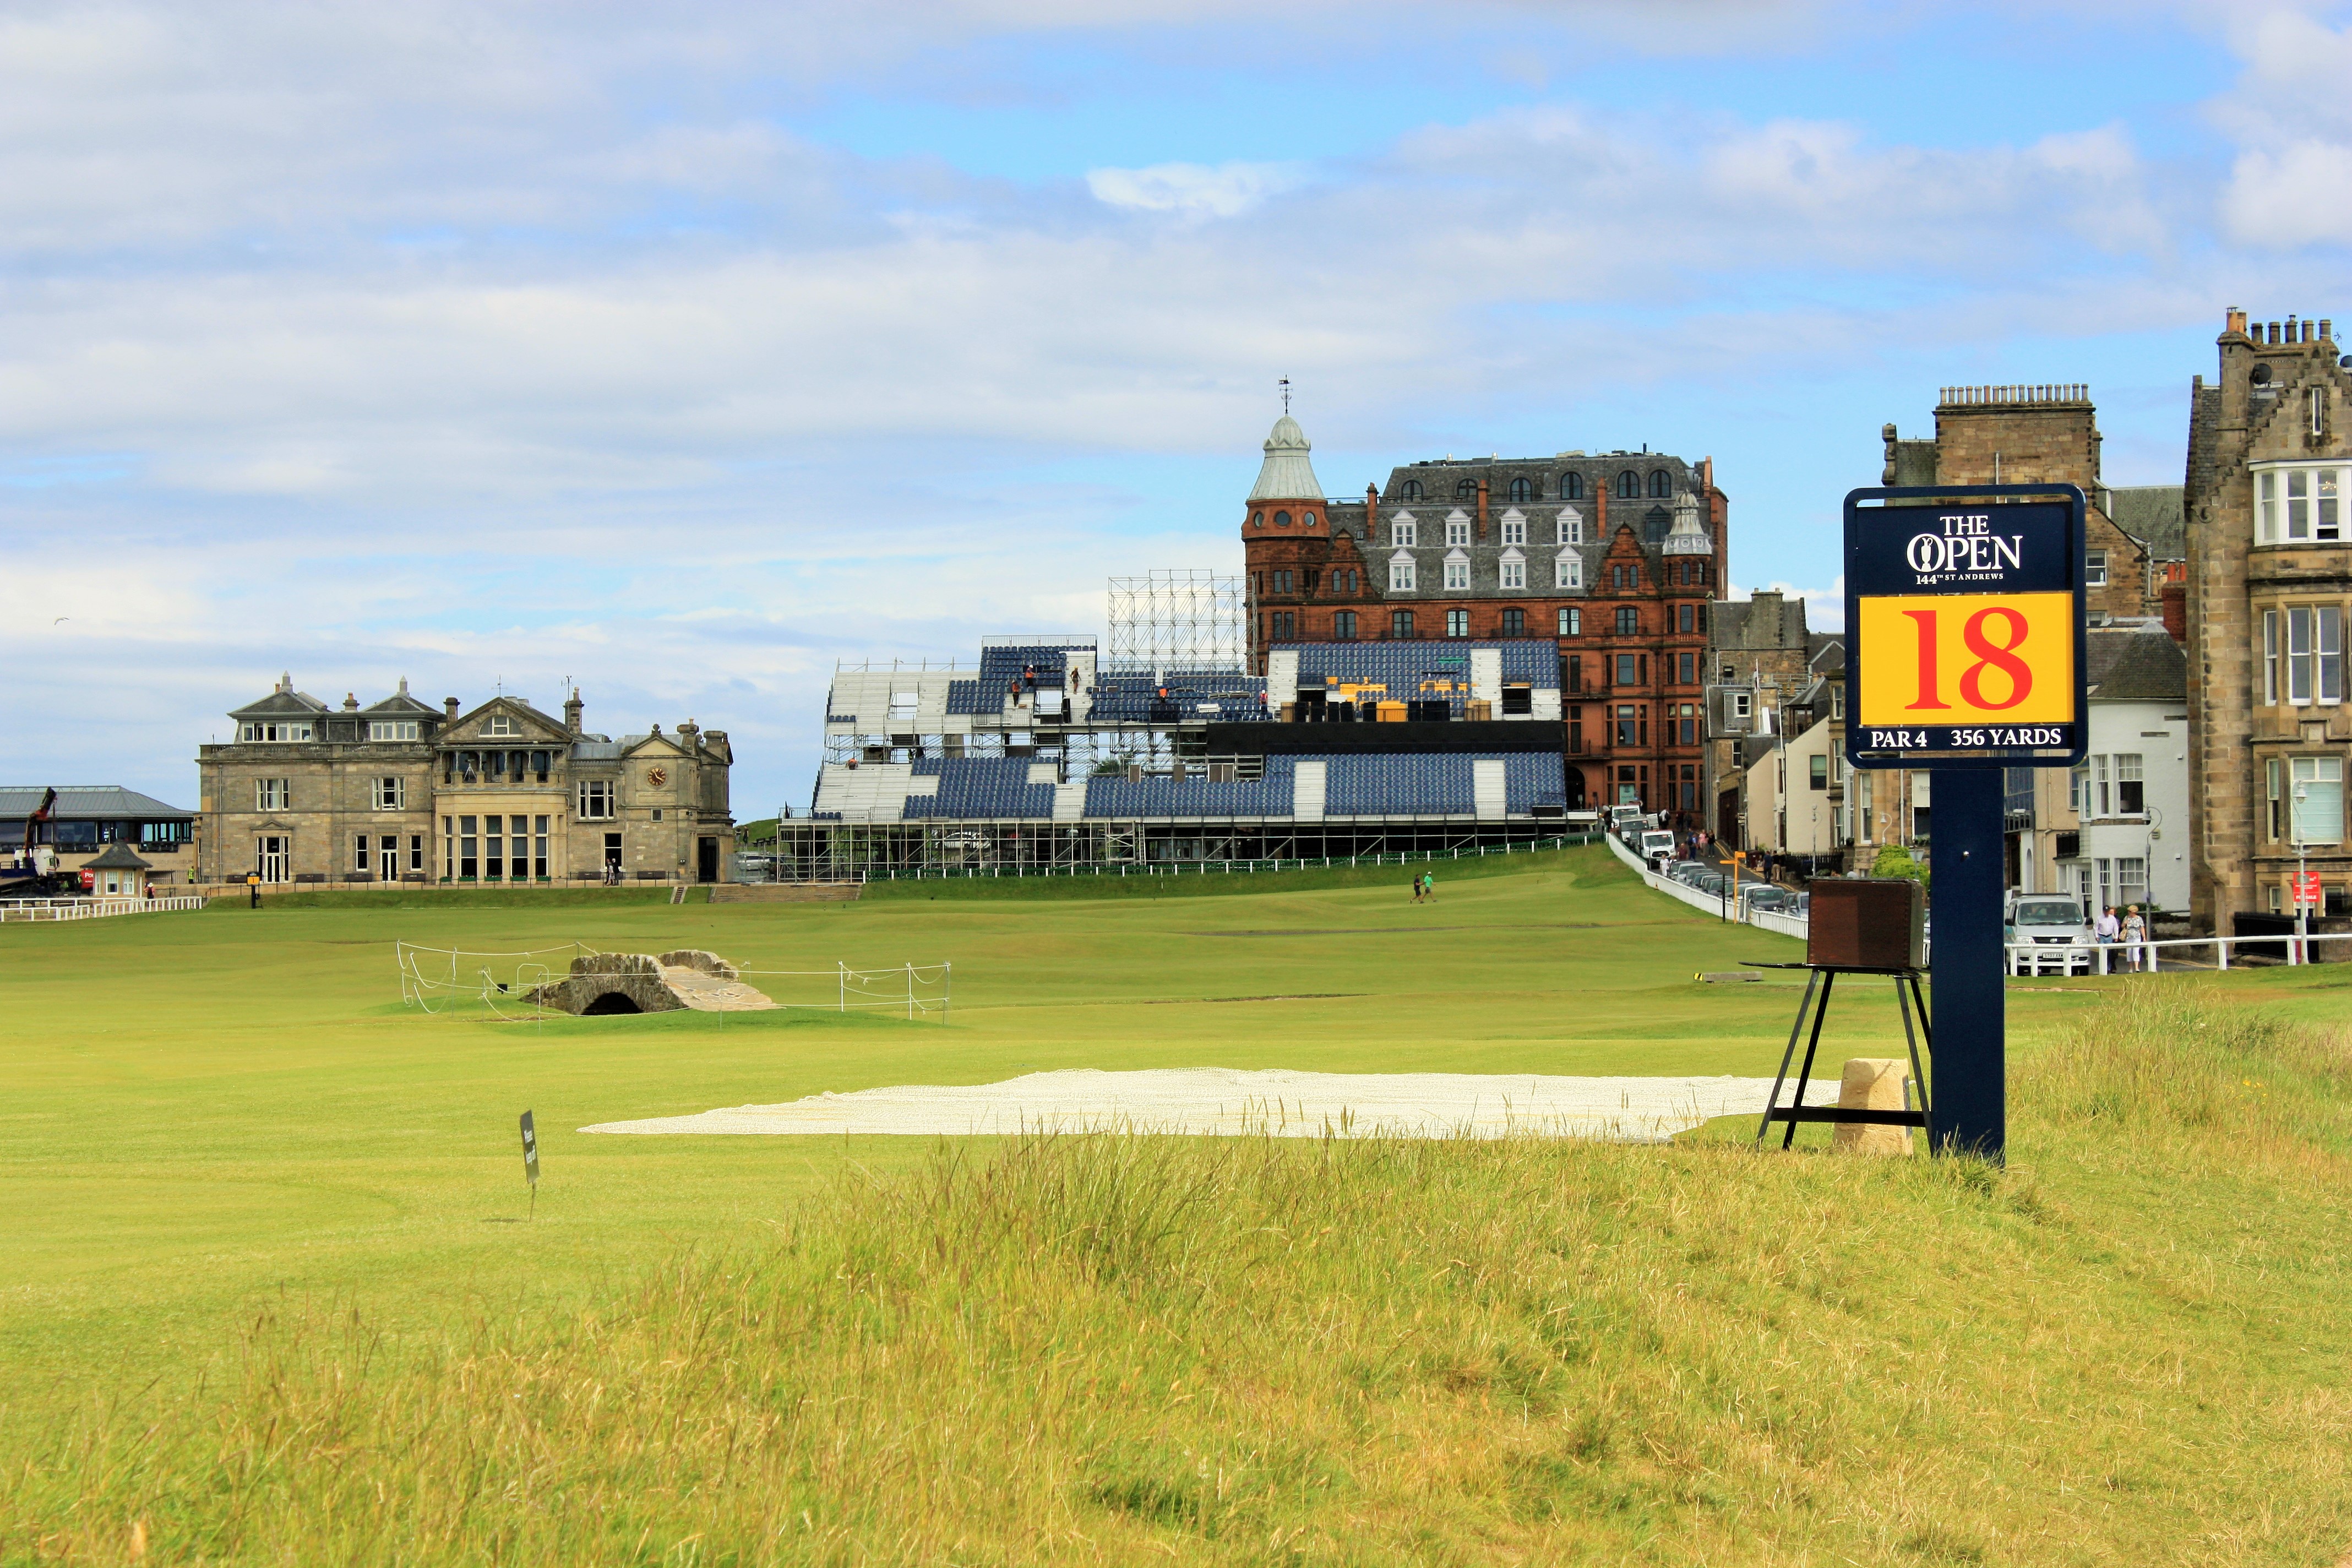 WORLD-CLASS GOLF - The Open 2015 at The Old Course